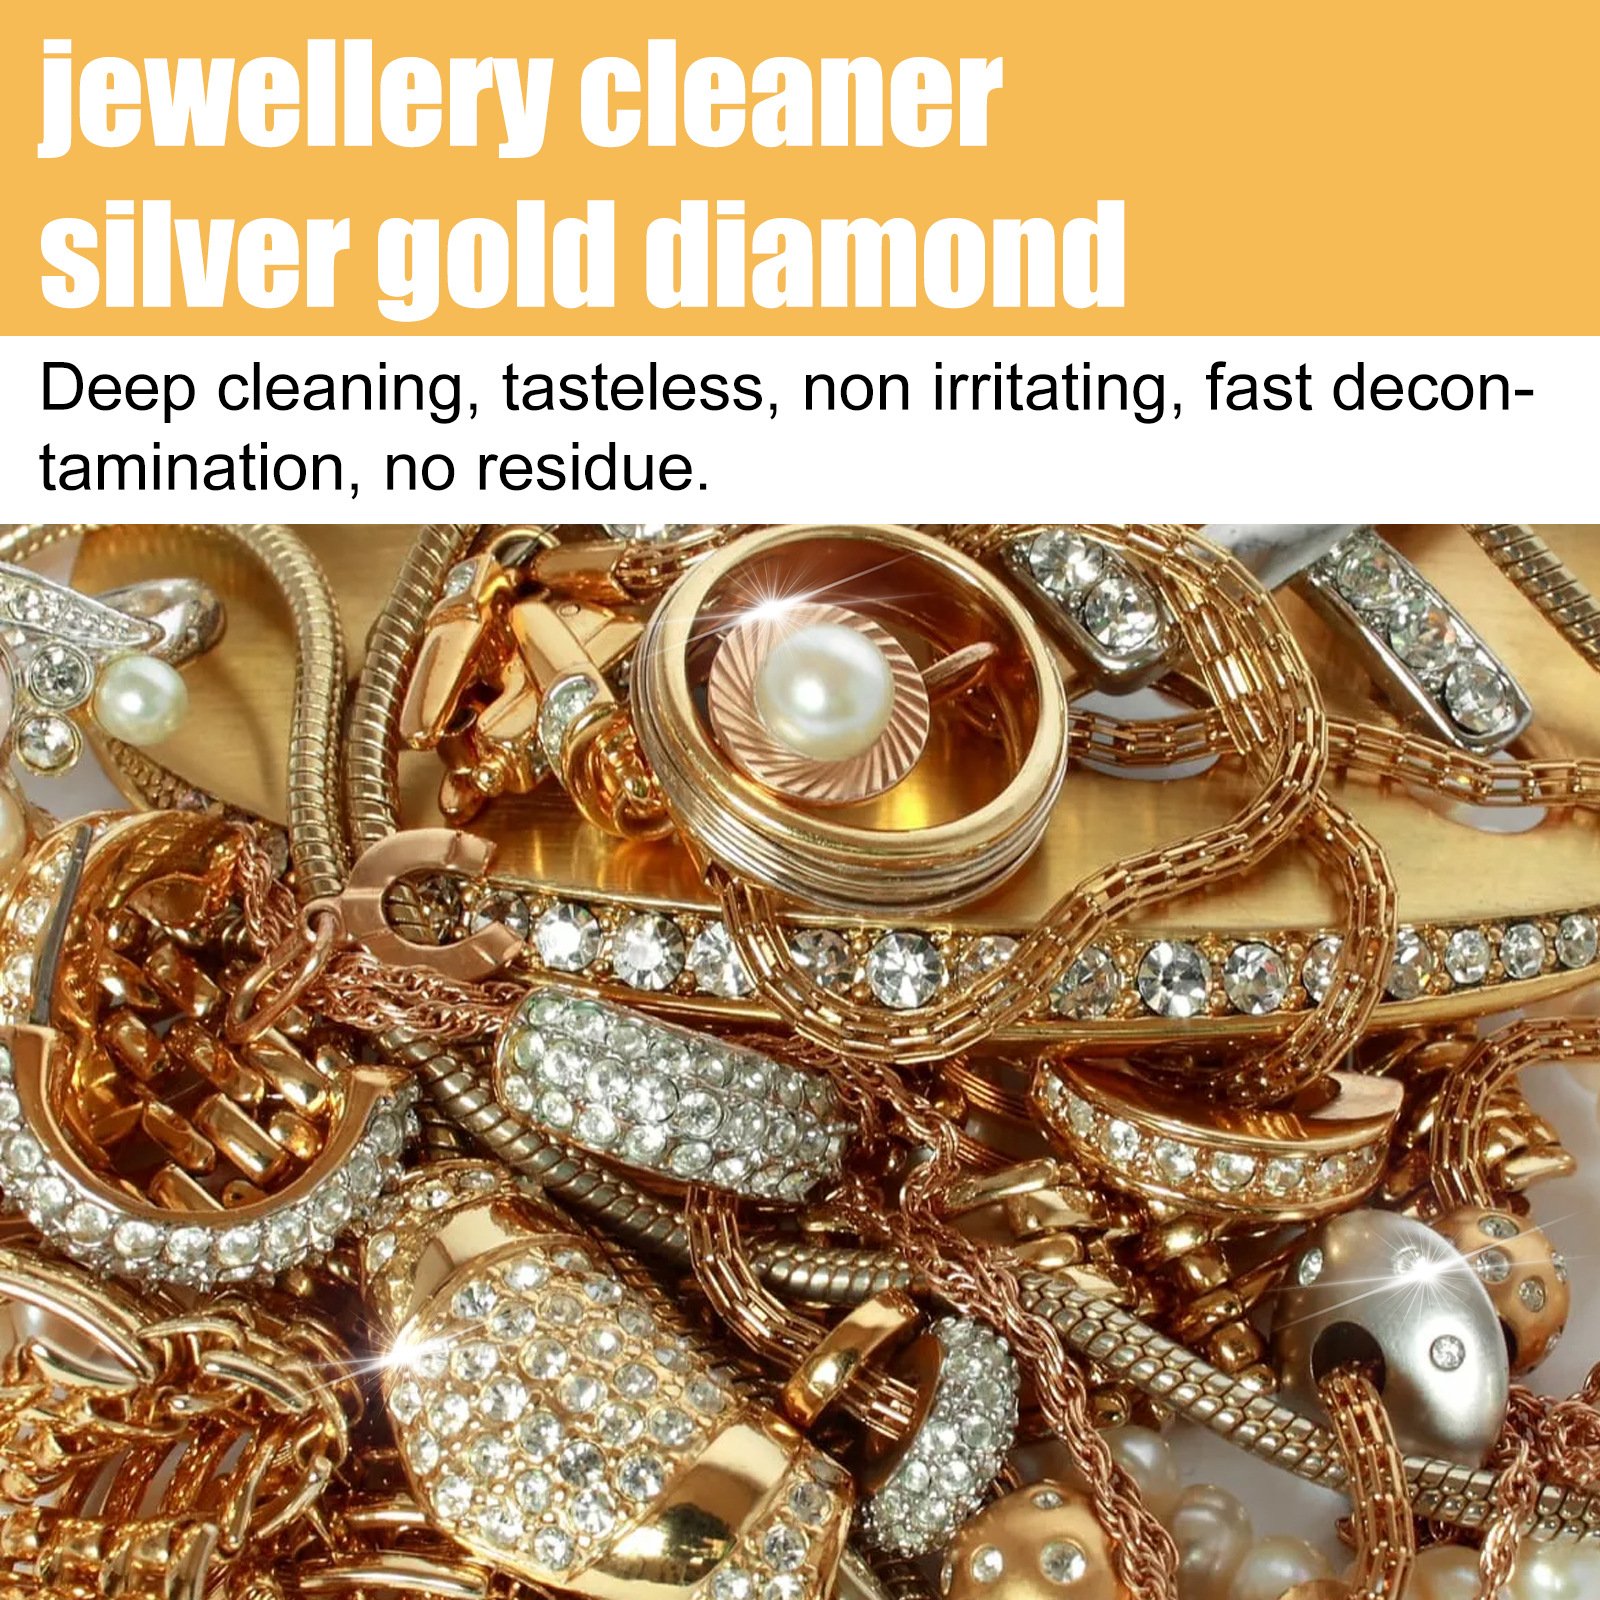 Jewelry Cleaner - Glass, Screen, and Jewelry Cleaning Solution Restores  Shine fo